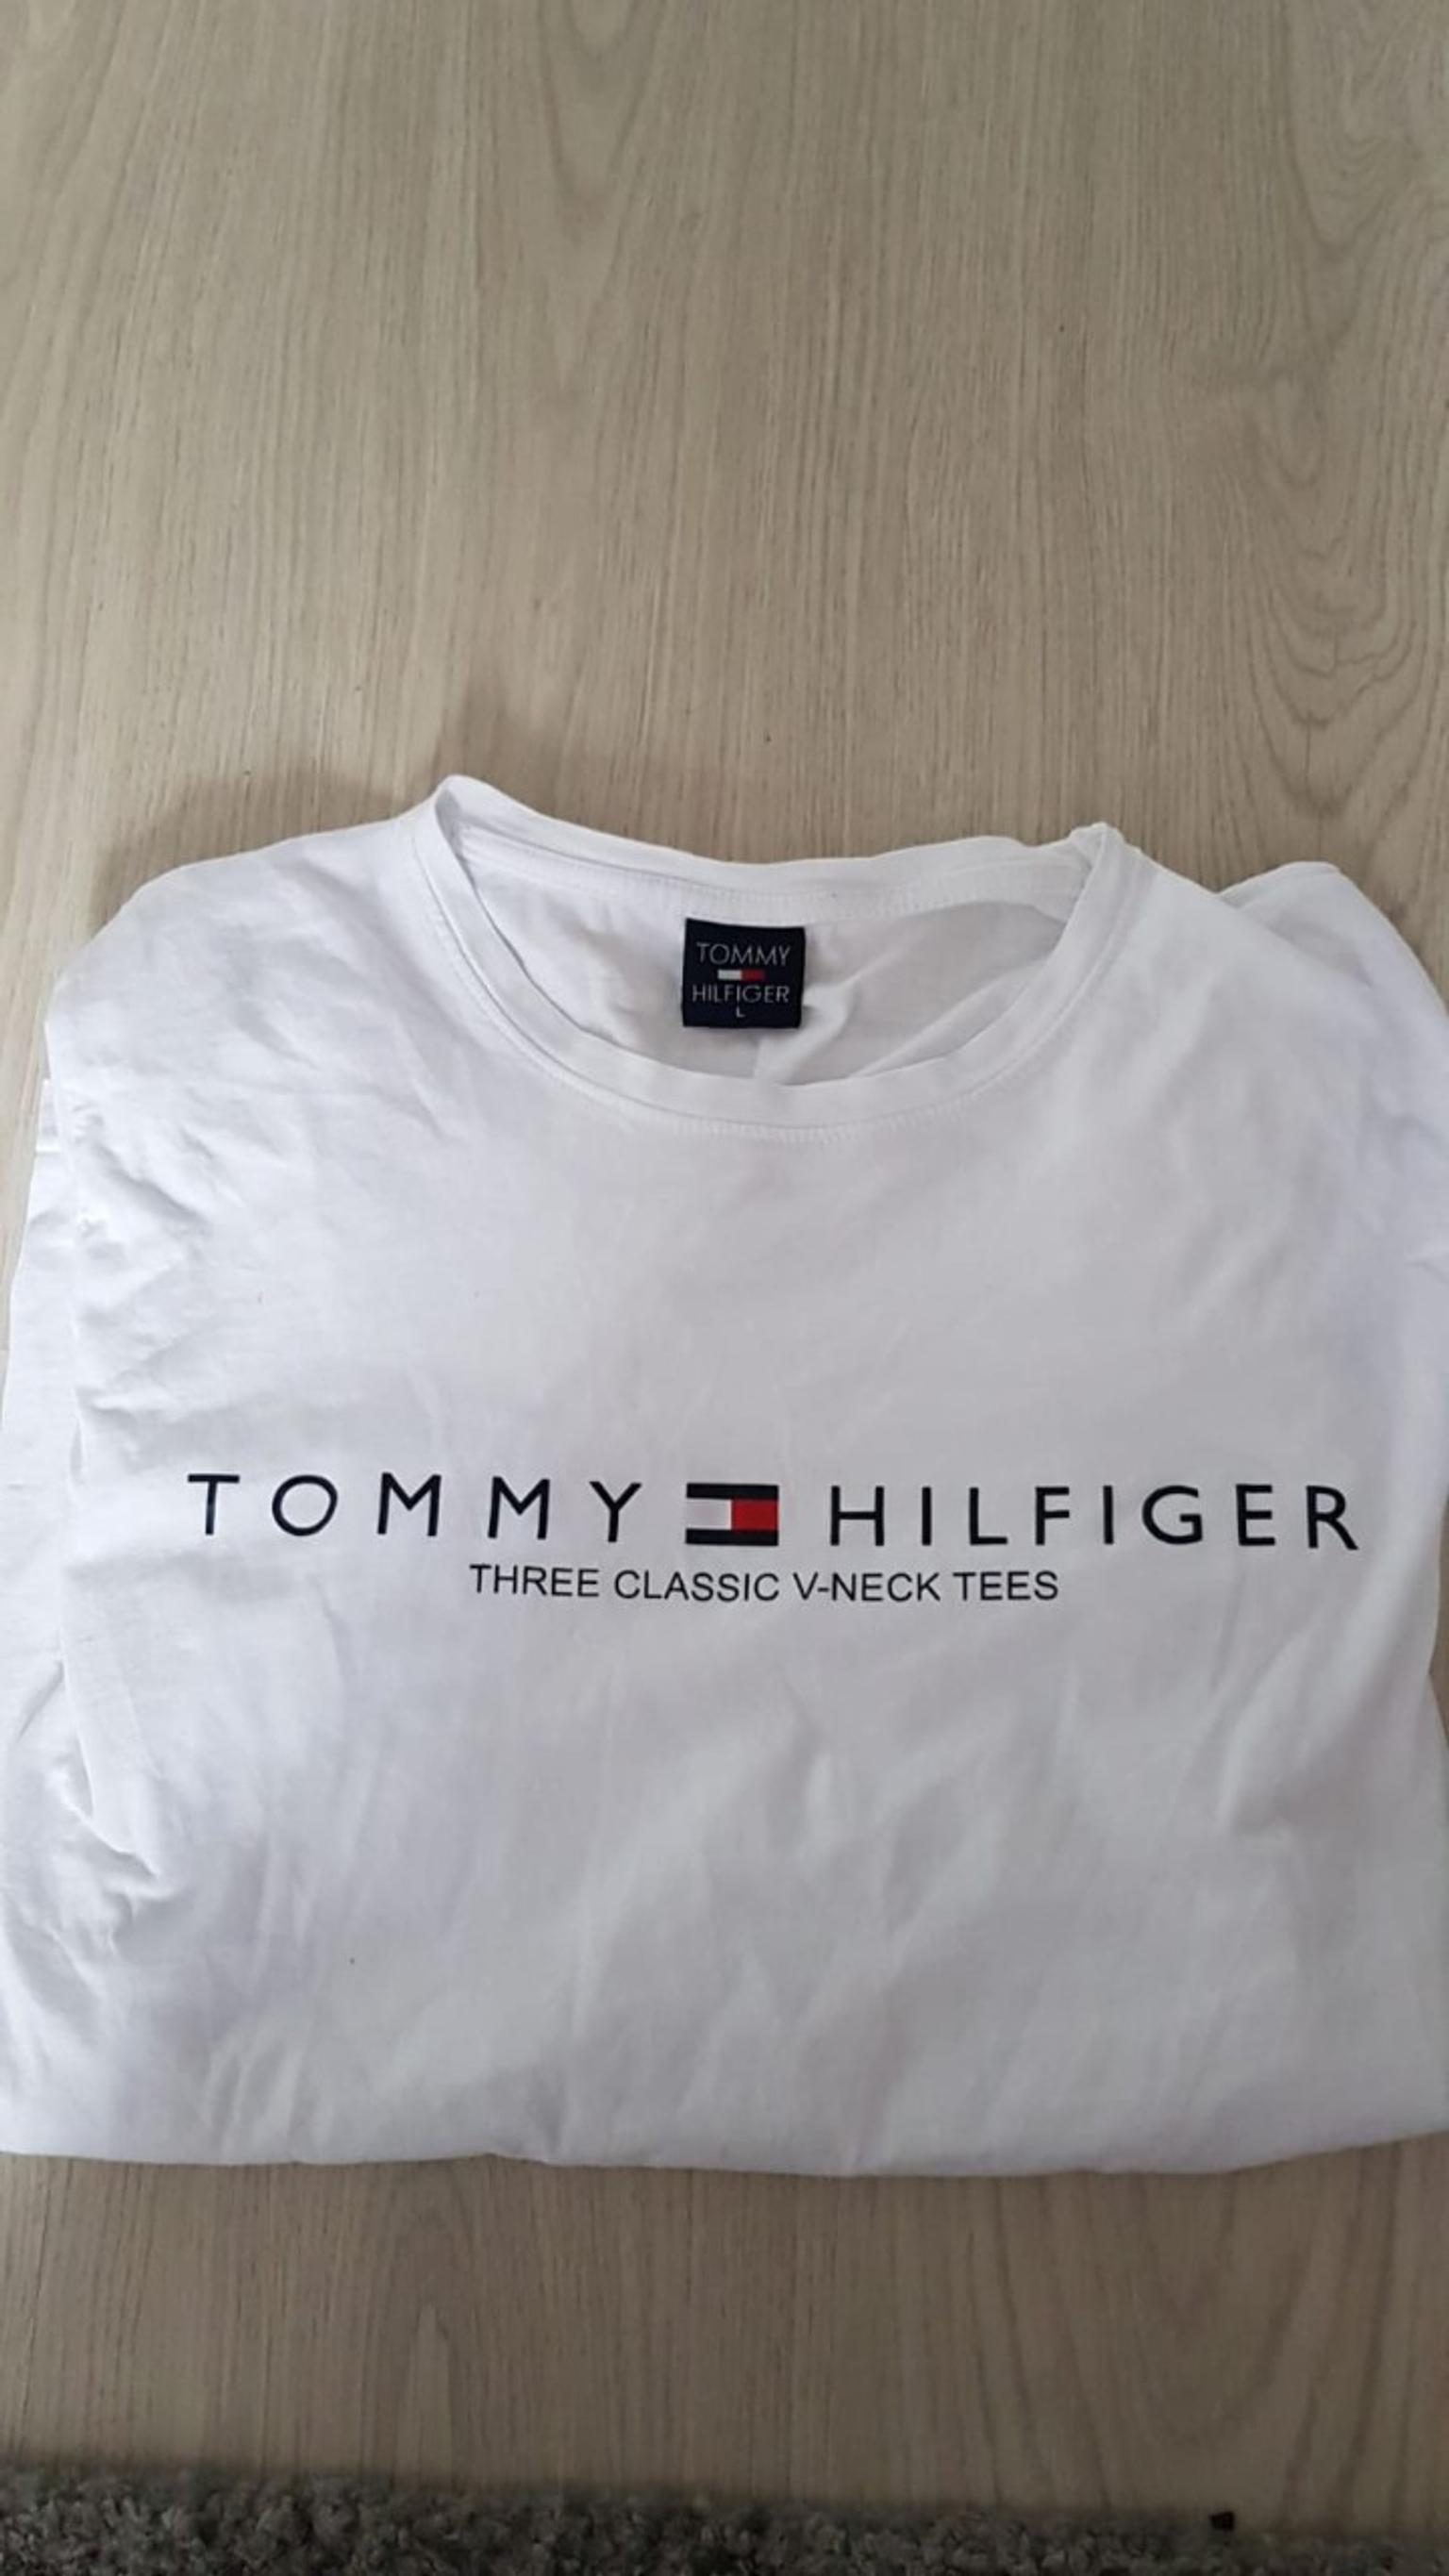 tommy hilfiger classic crew neck tee